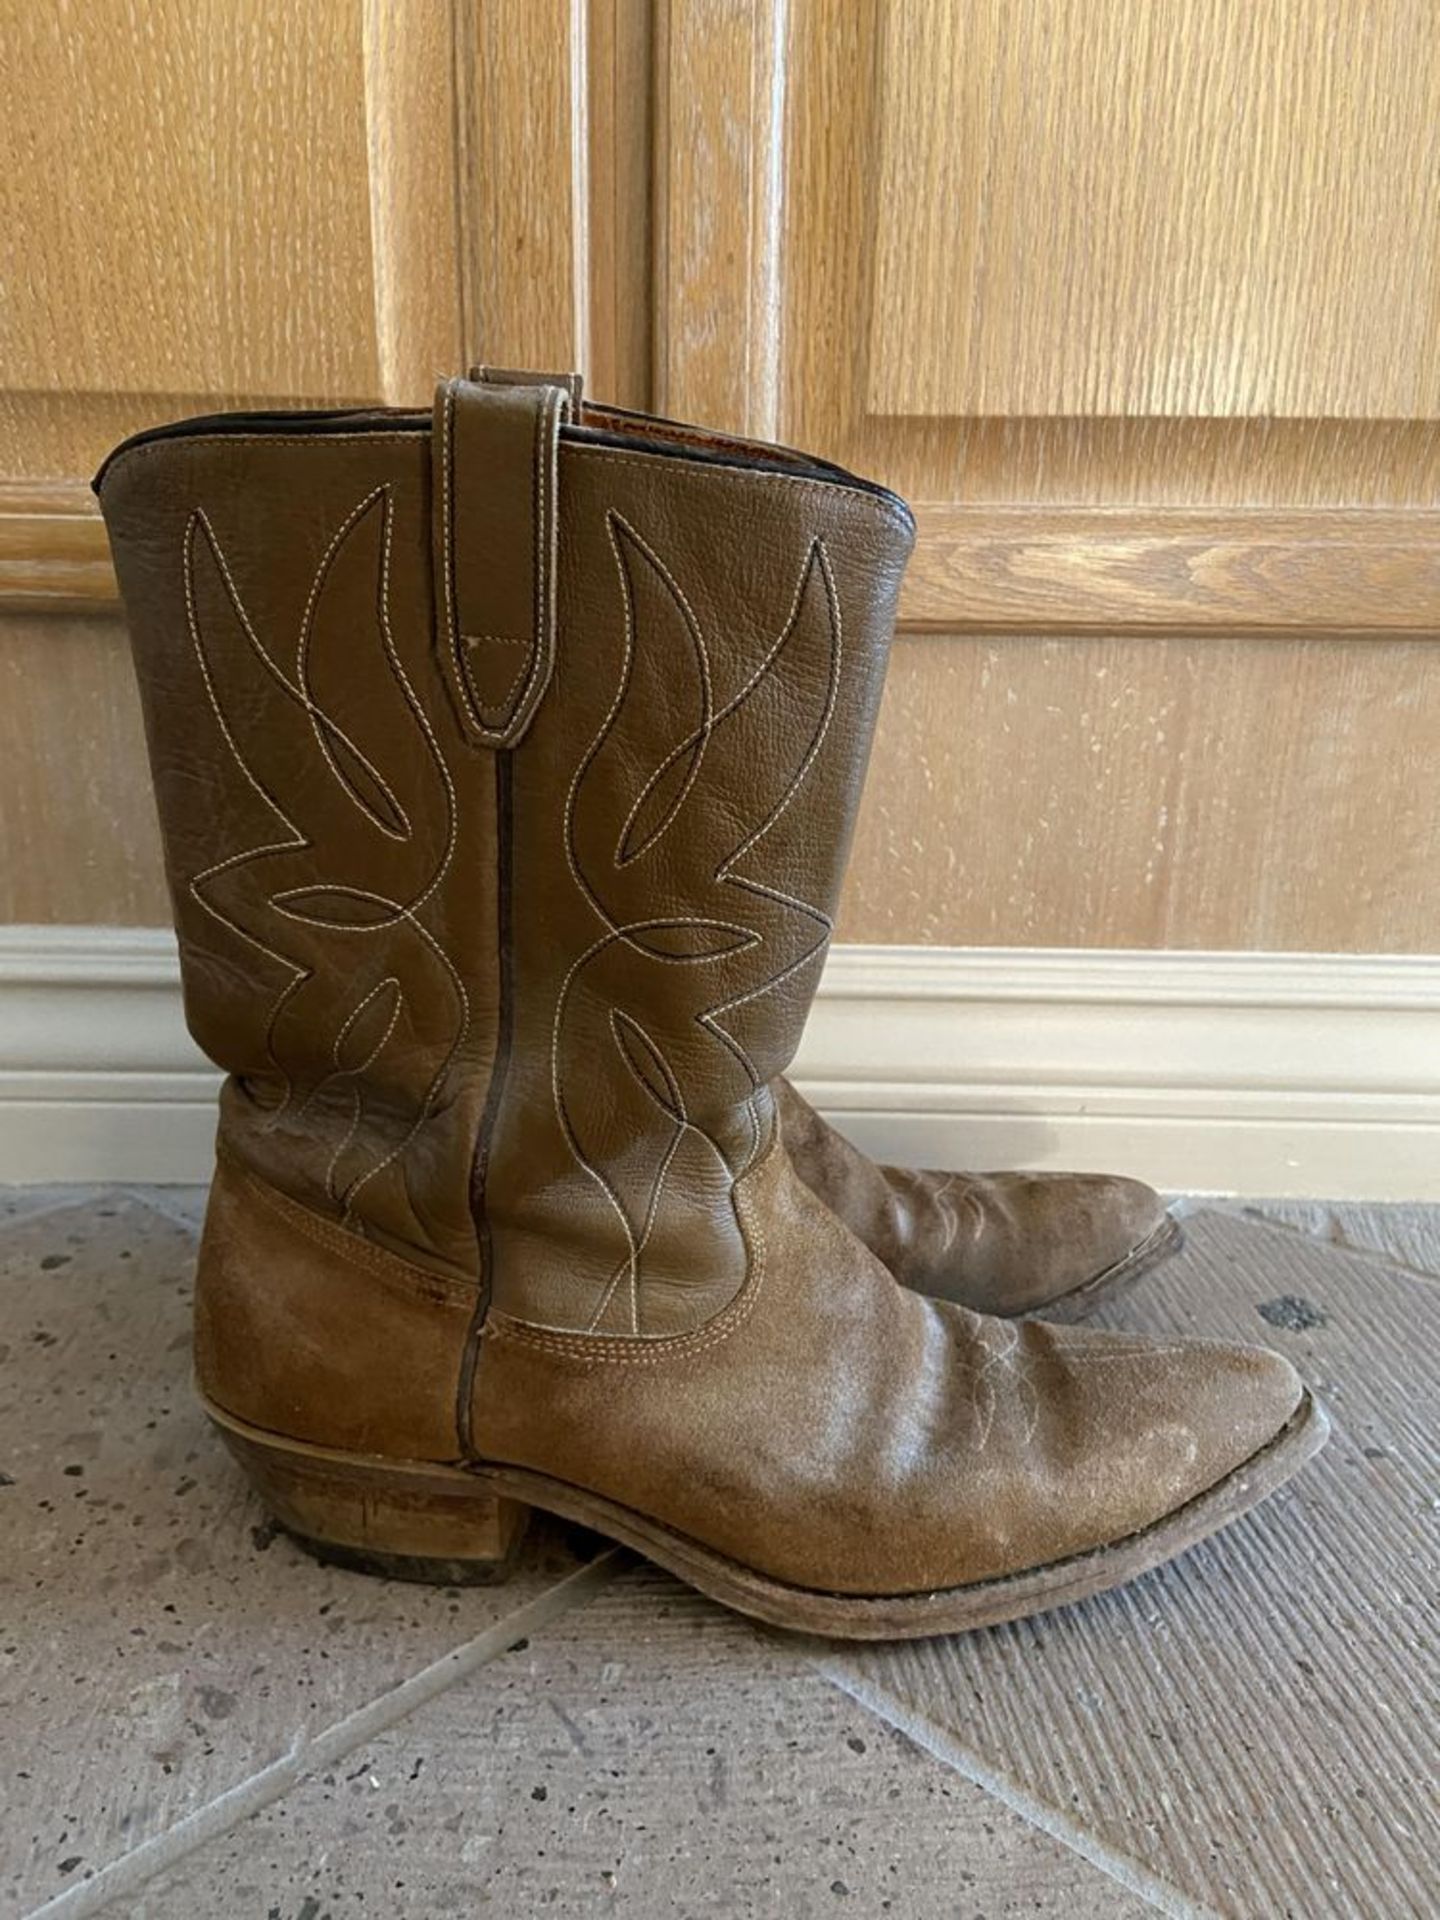 ACME Cowboy Boots Brown, Believed to be Size 10.5 LT8